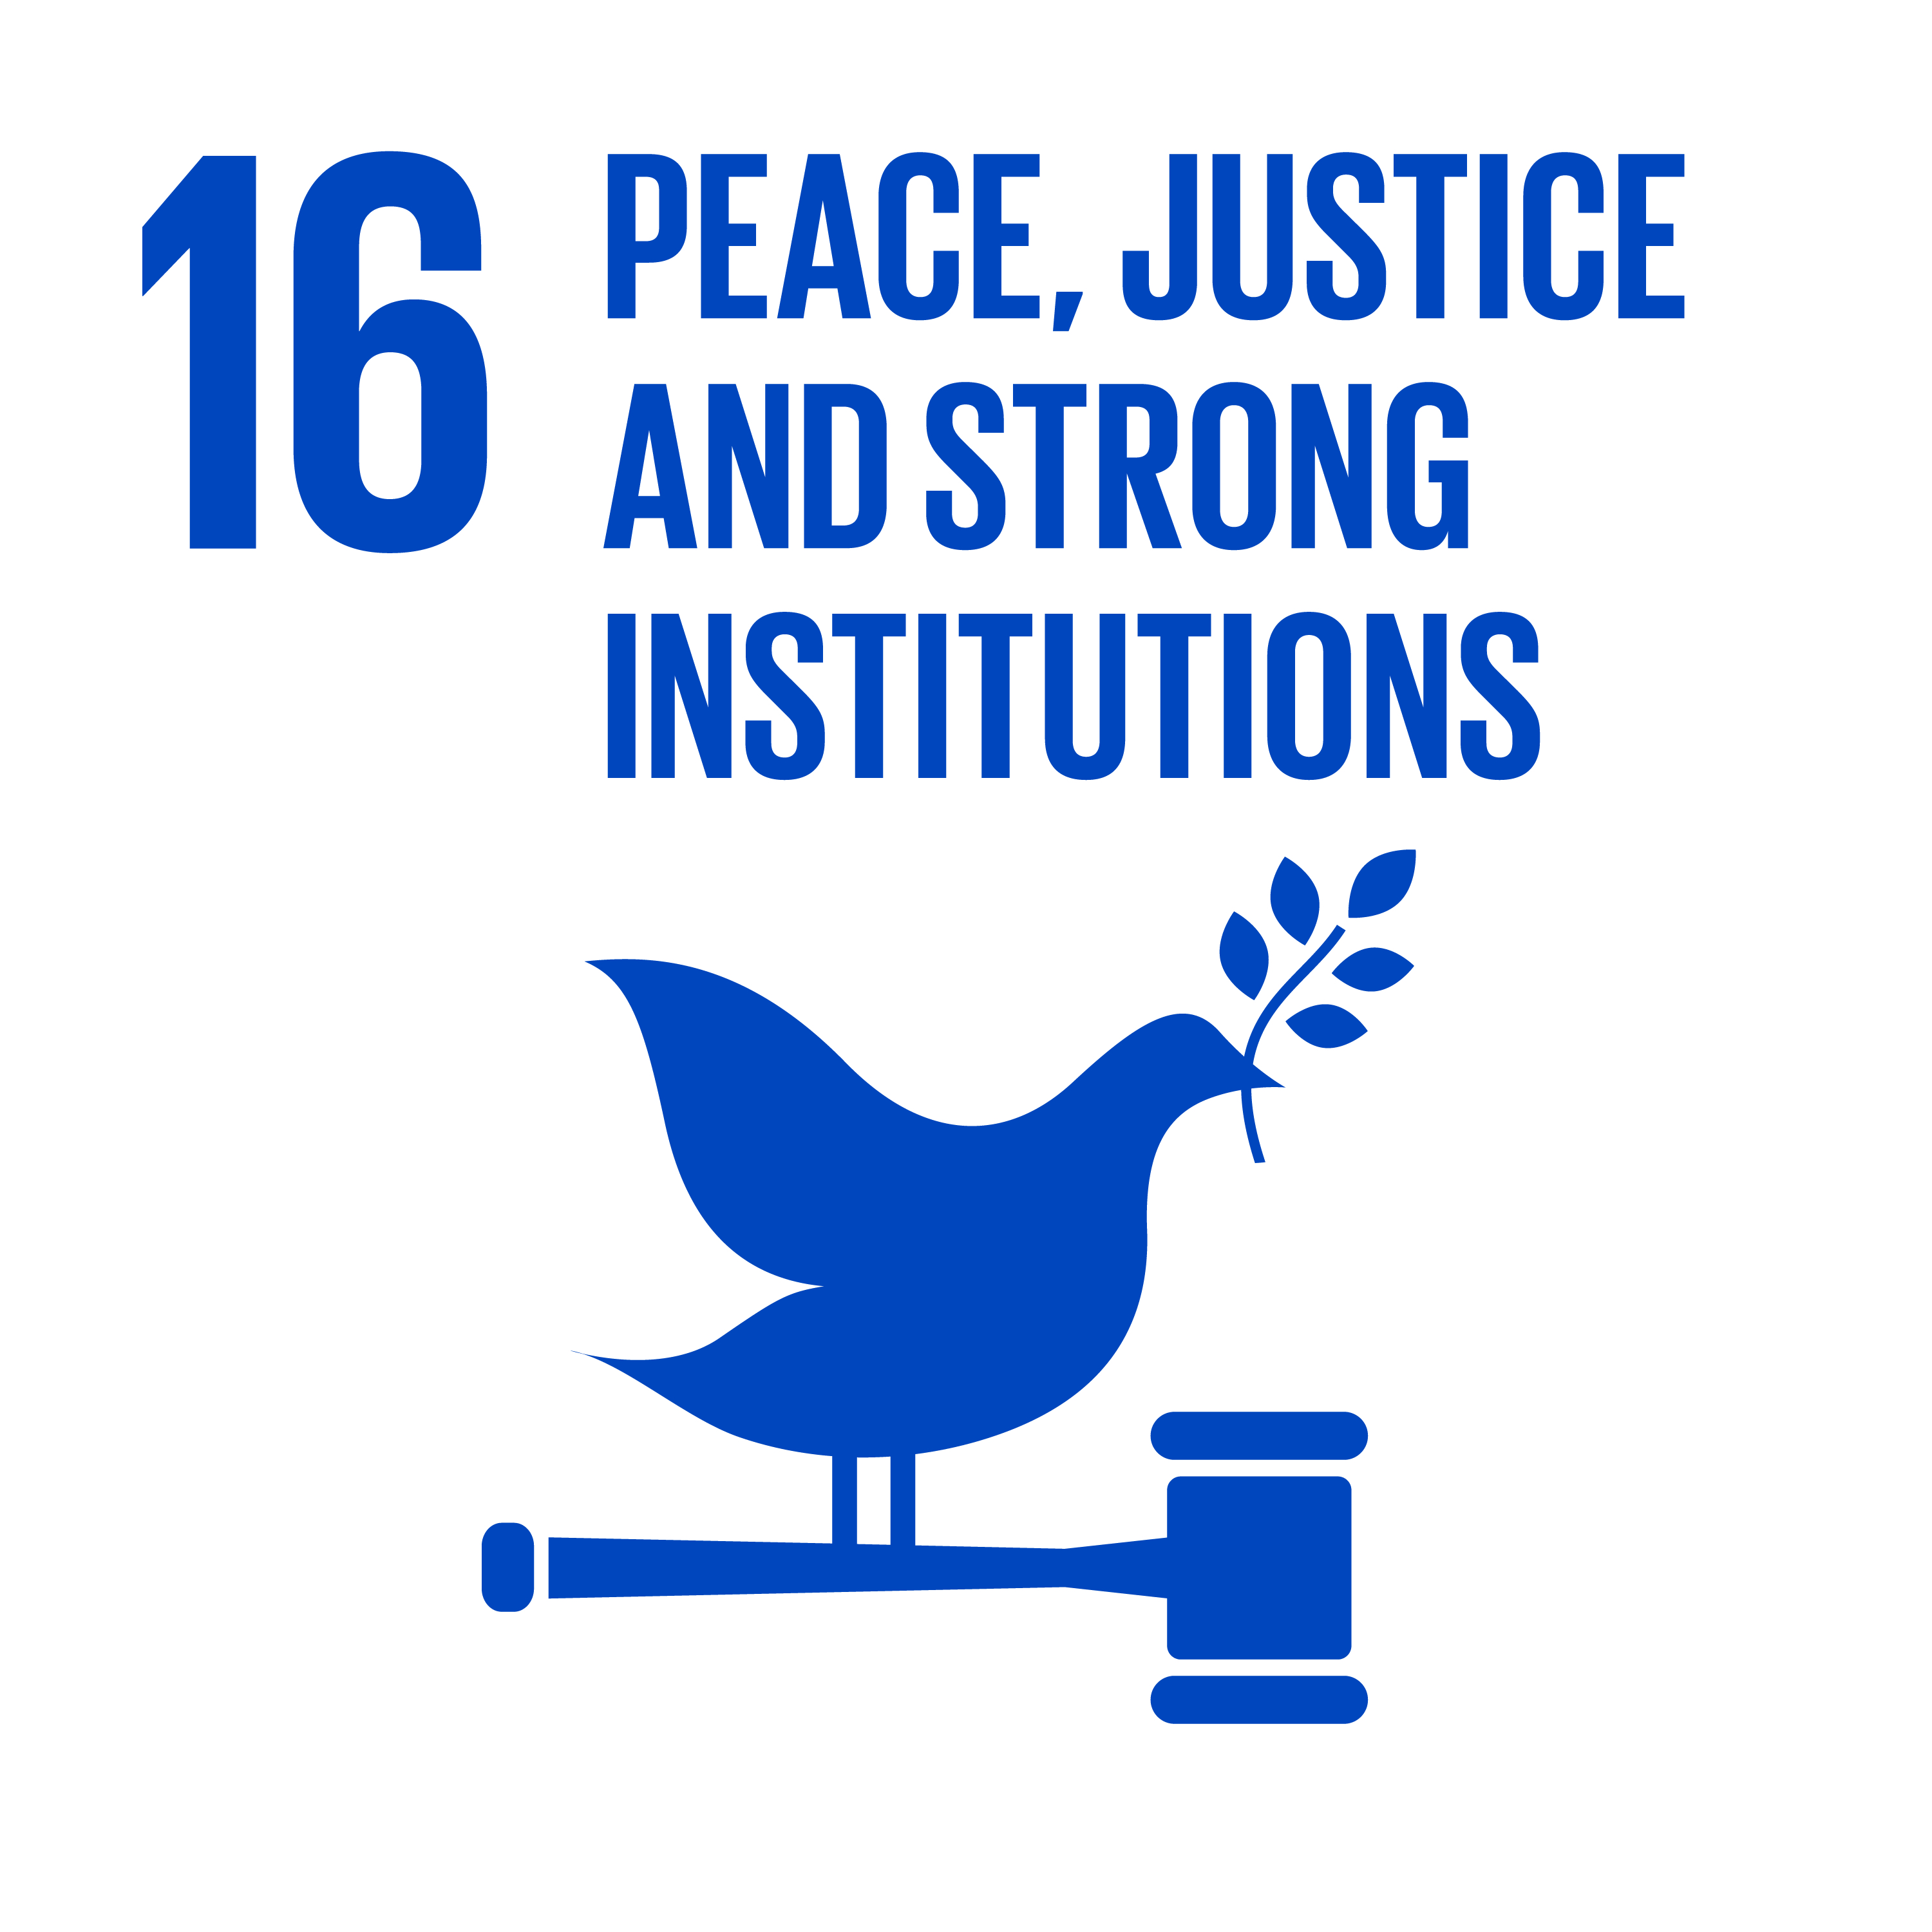 Sustainable development goals: Number 16 - Peace, justice and strong institutions